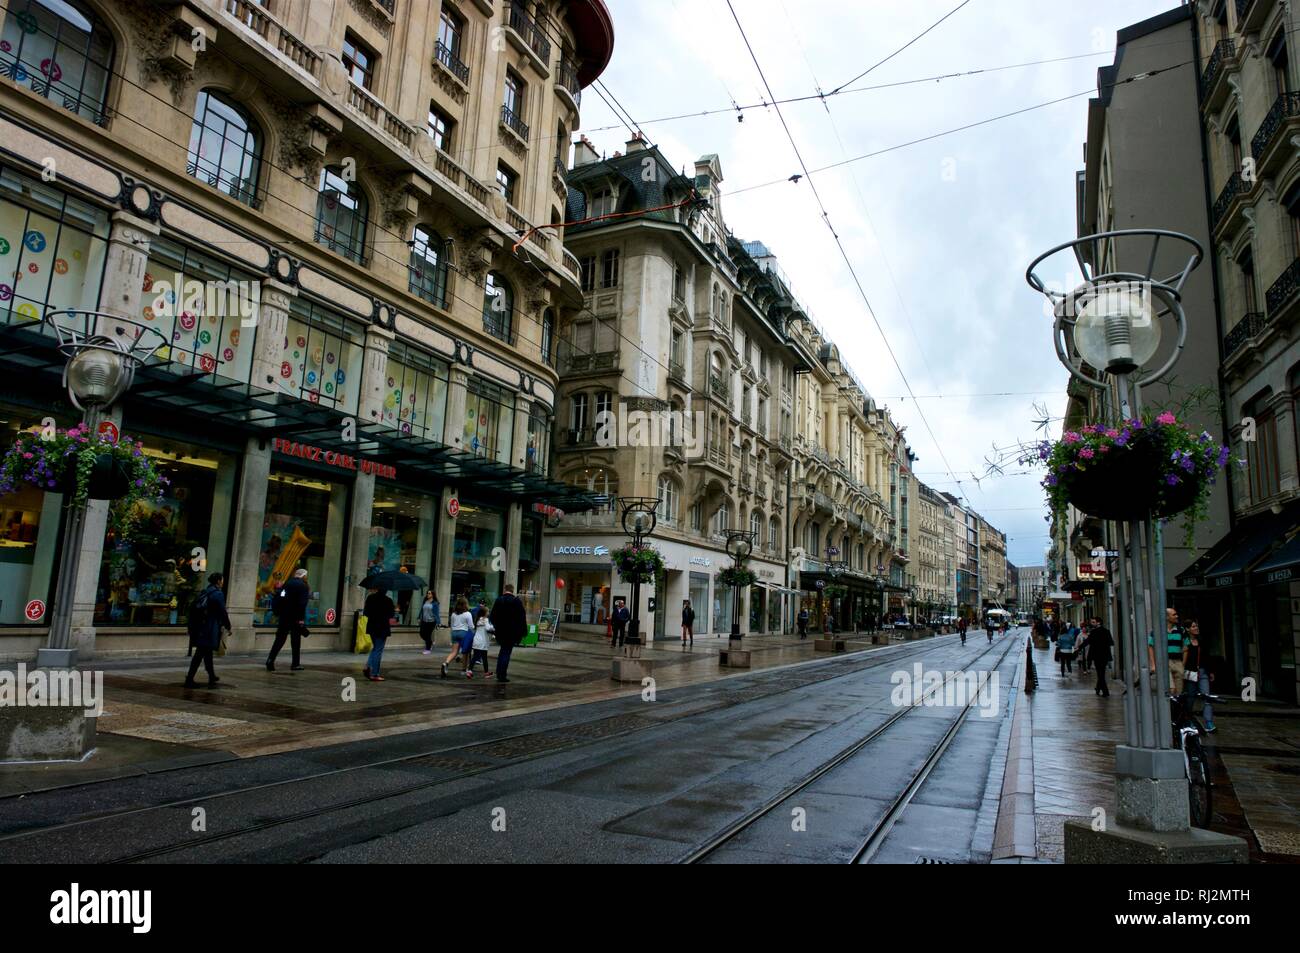 Apartment blocks and commercial buildings in Old Town Geneva Switzerland on rainy day Stock Photo